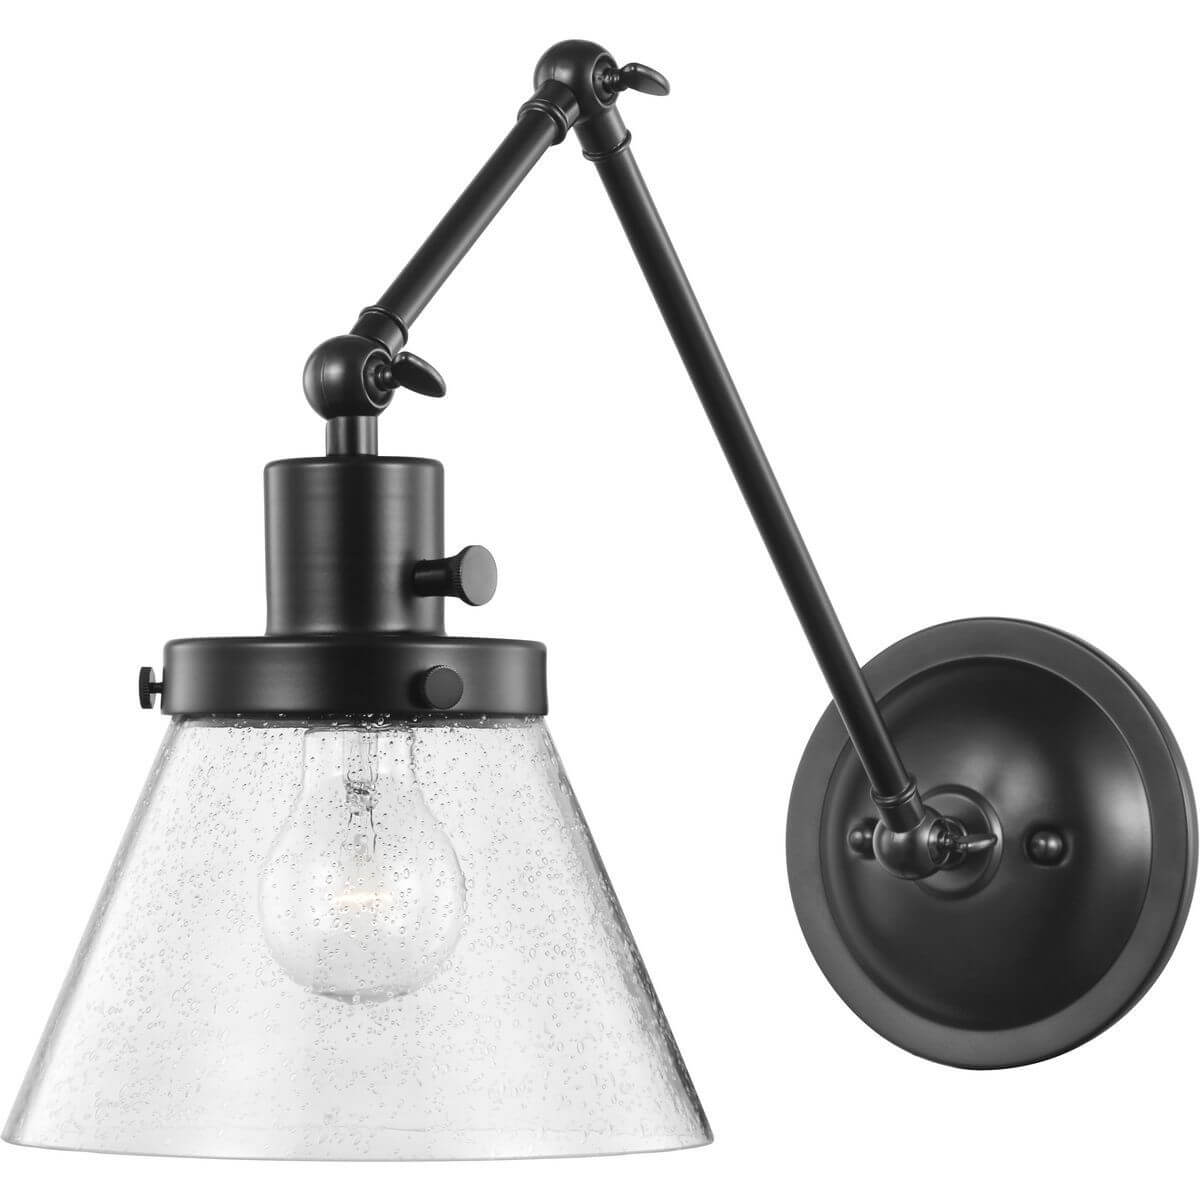 Progress Lighting Hinton 1 Light 14 inch Tall Swing Arm Wall Light in Matte Black with Clear Seeded Glass P710094-031